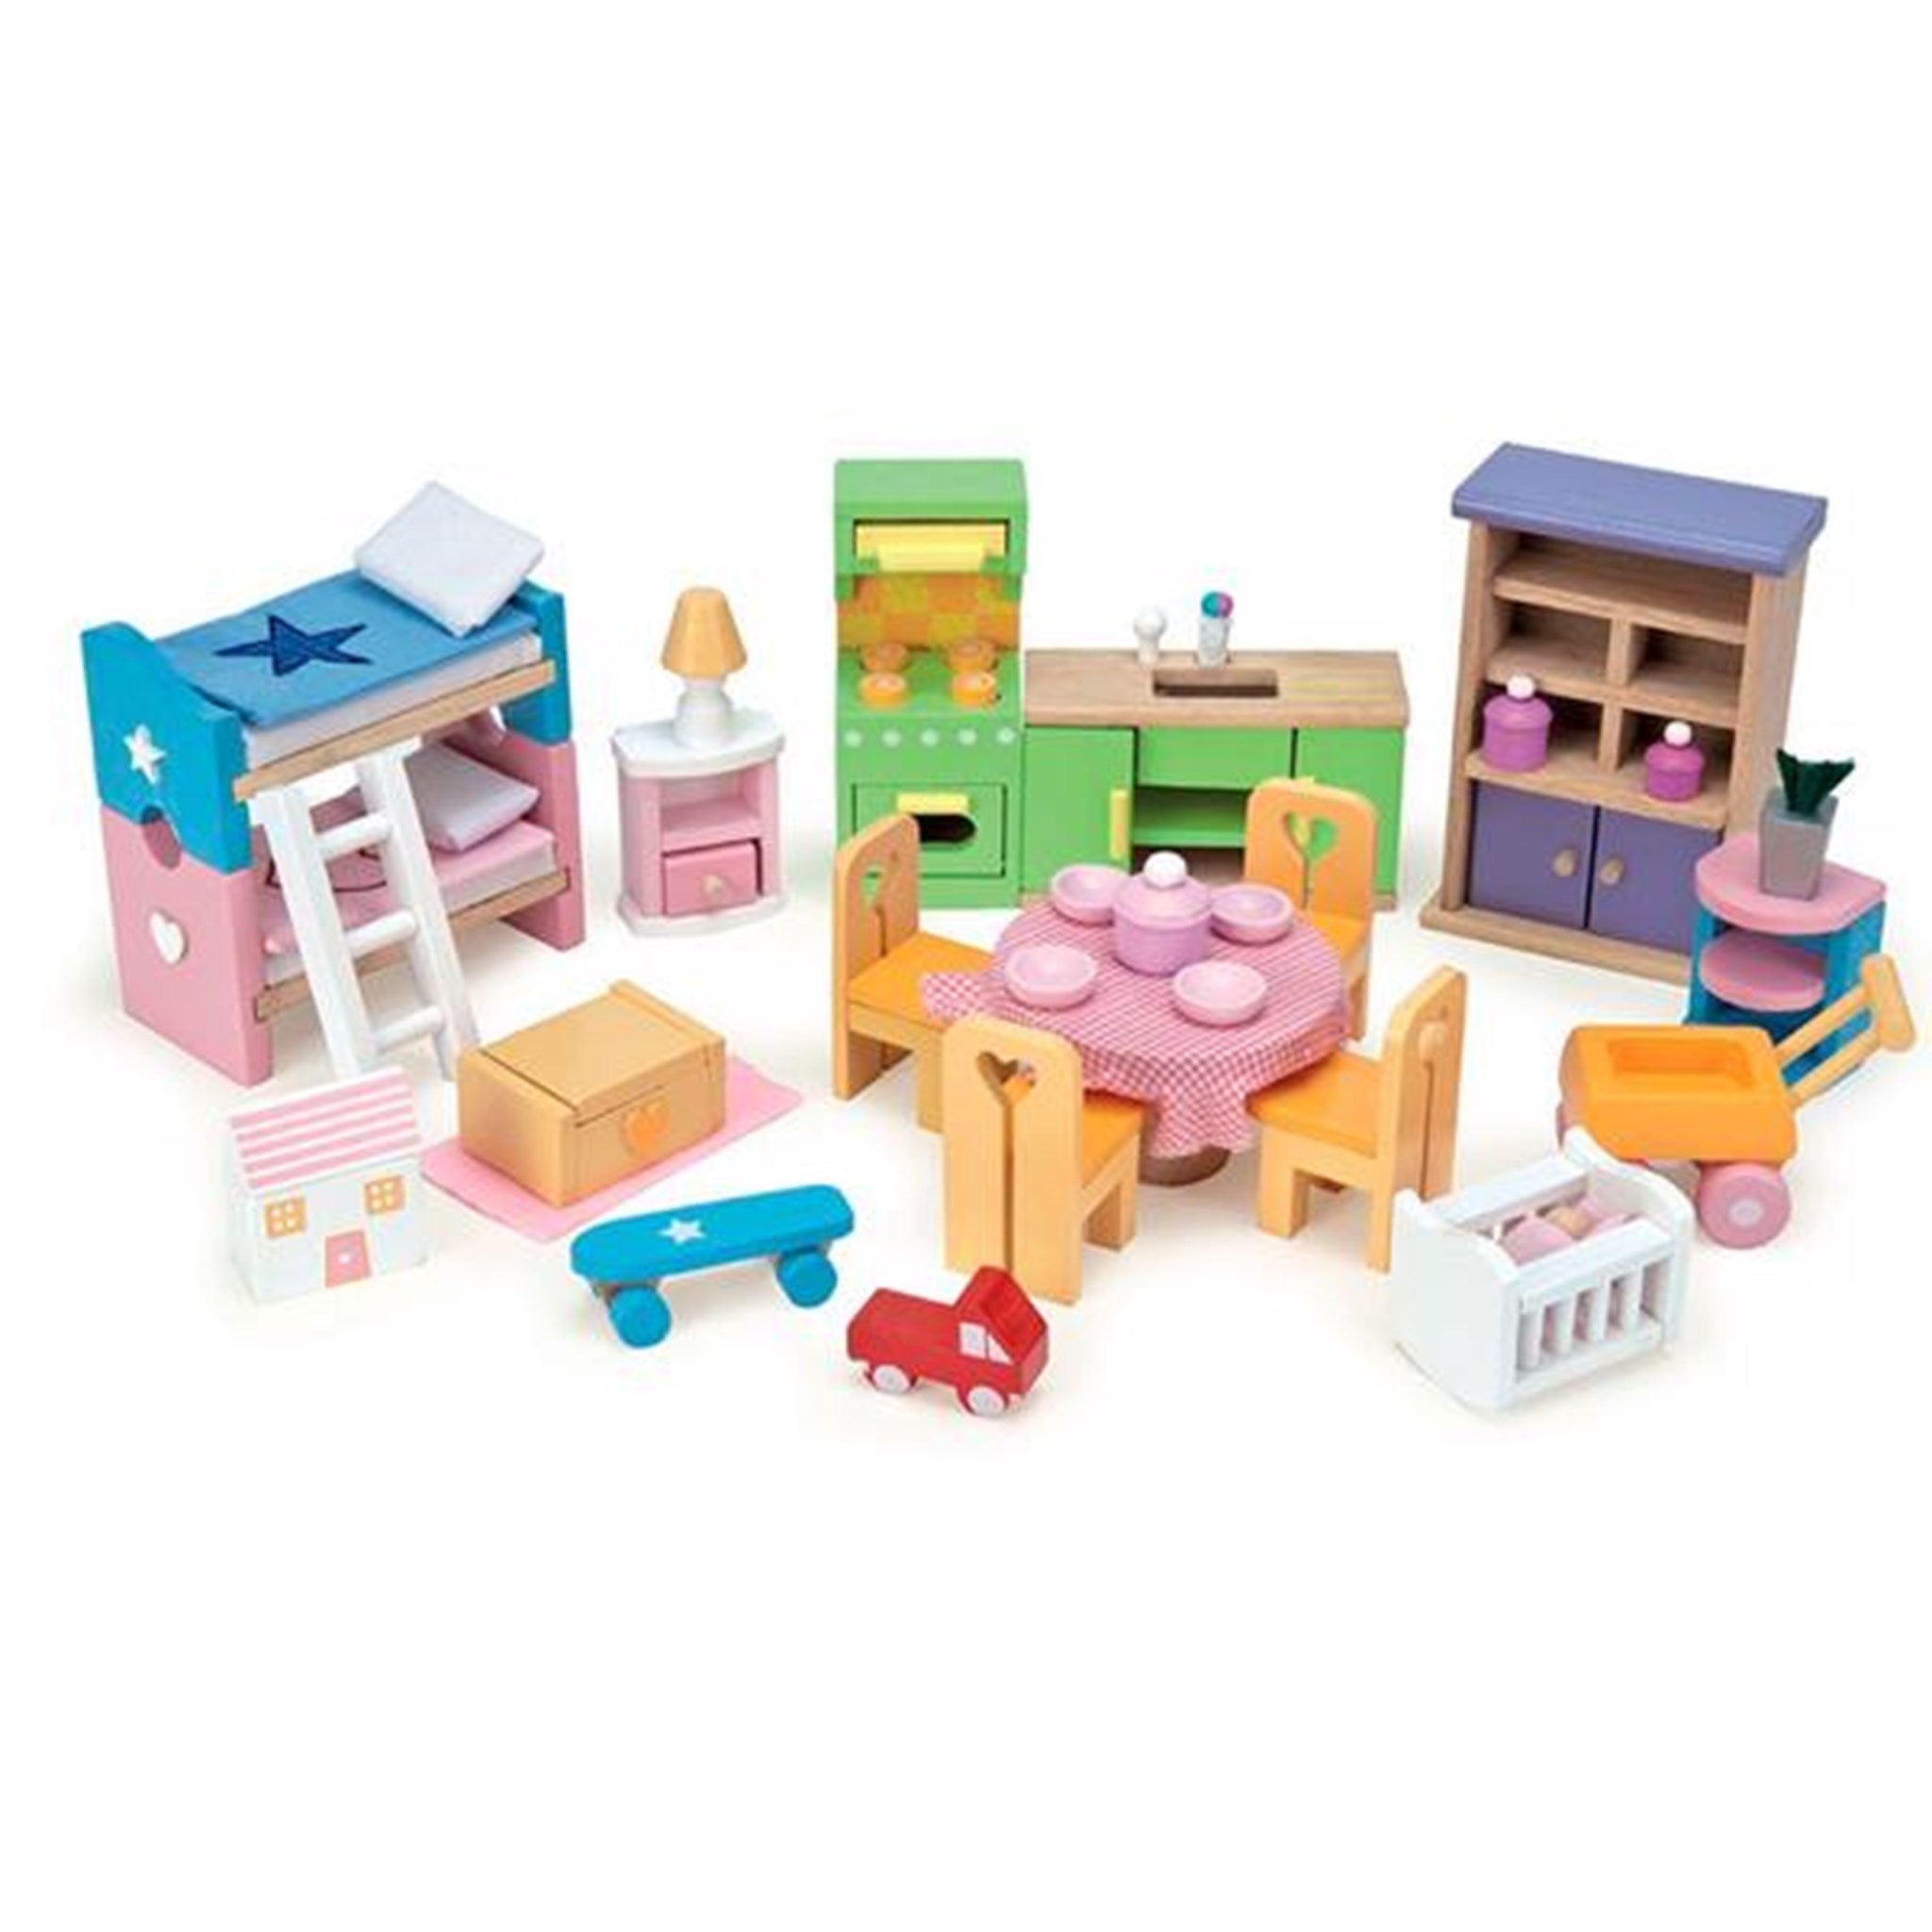 Le Toy Van Sweetheart Vacation House 3